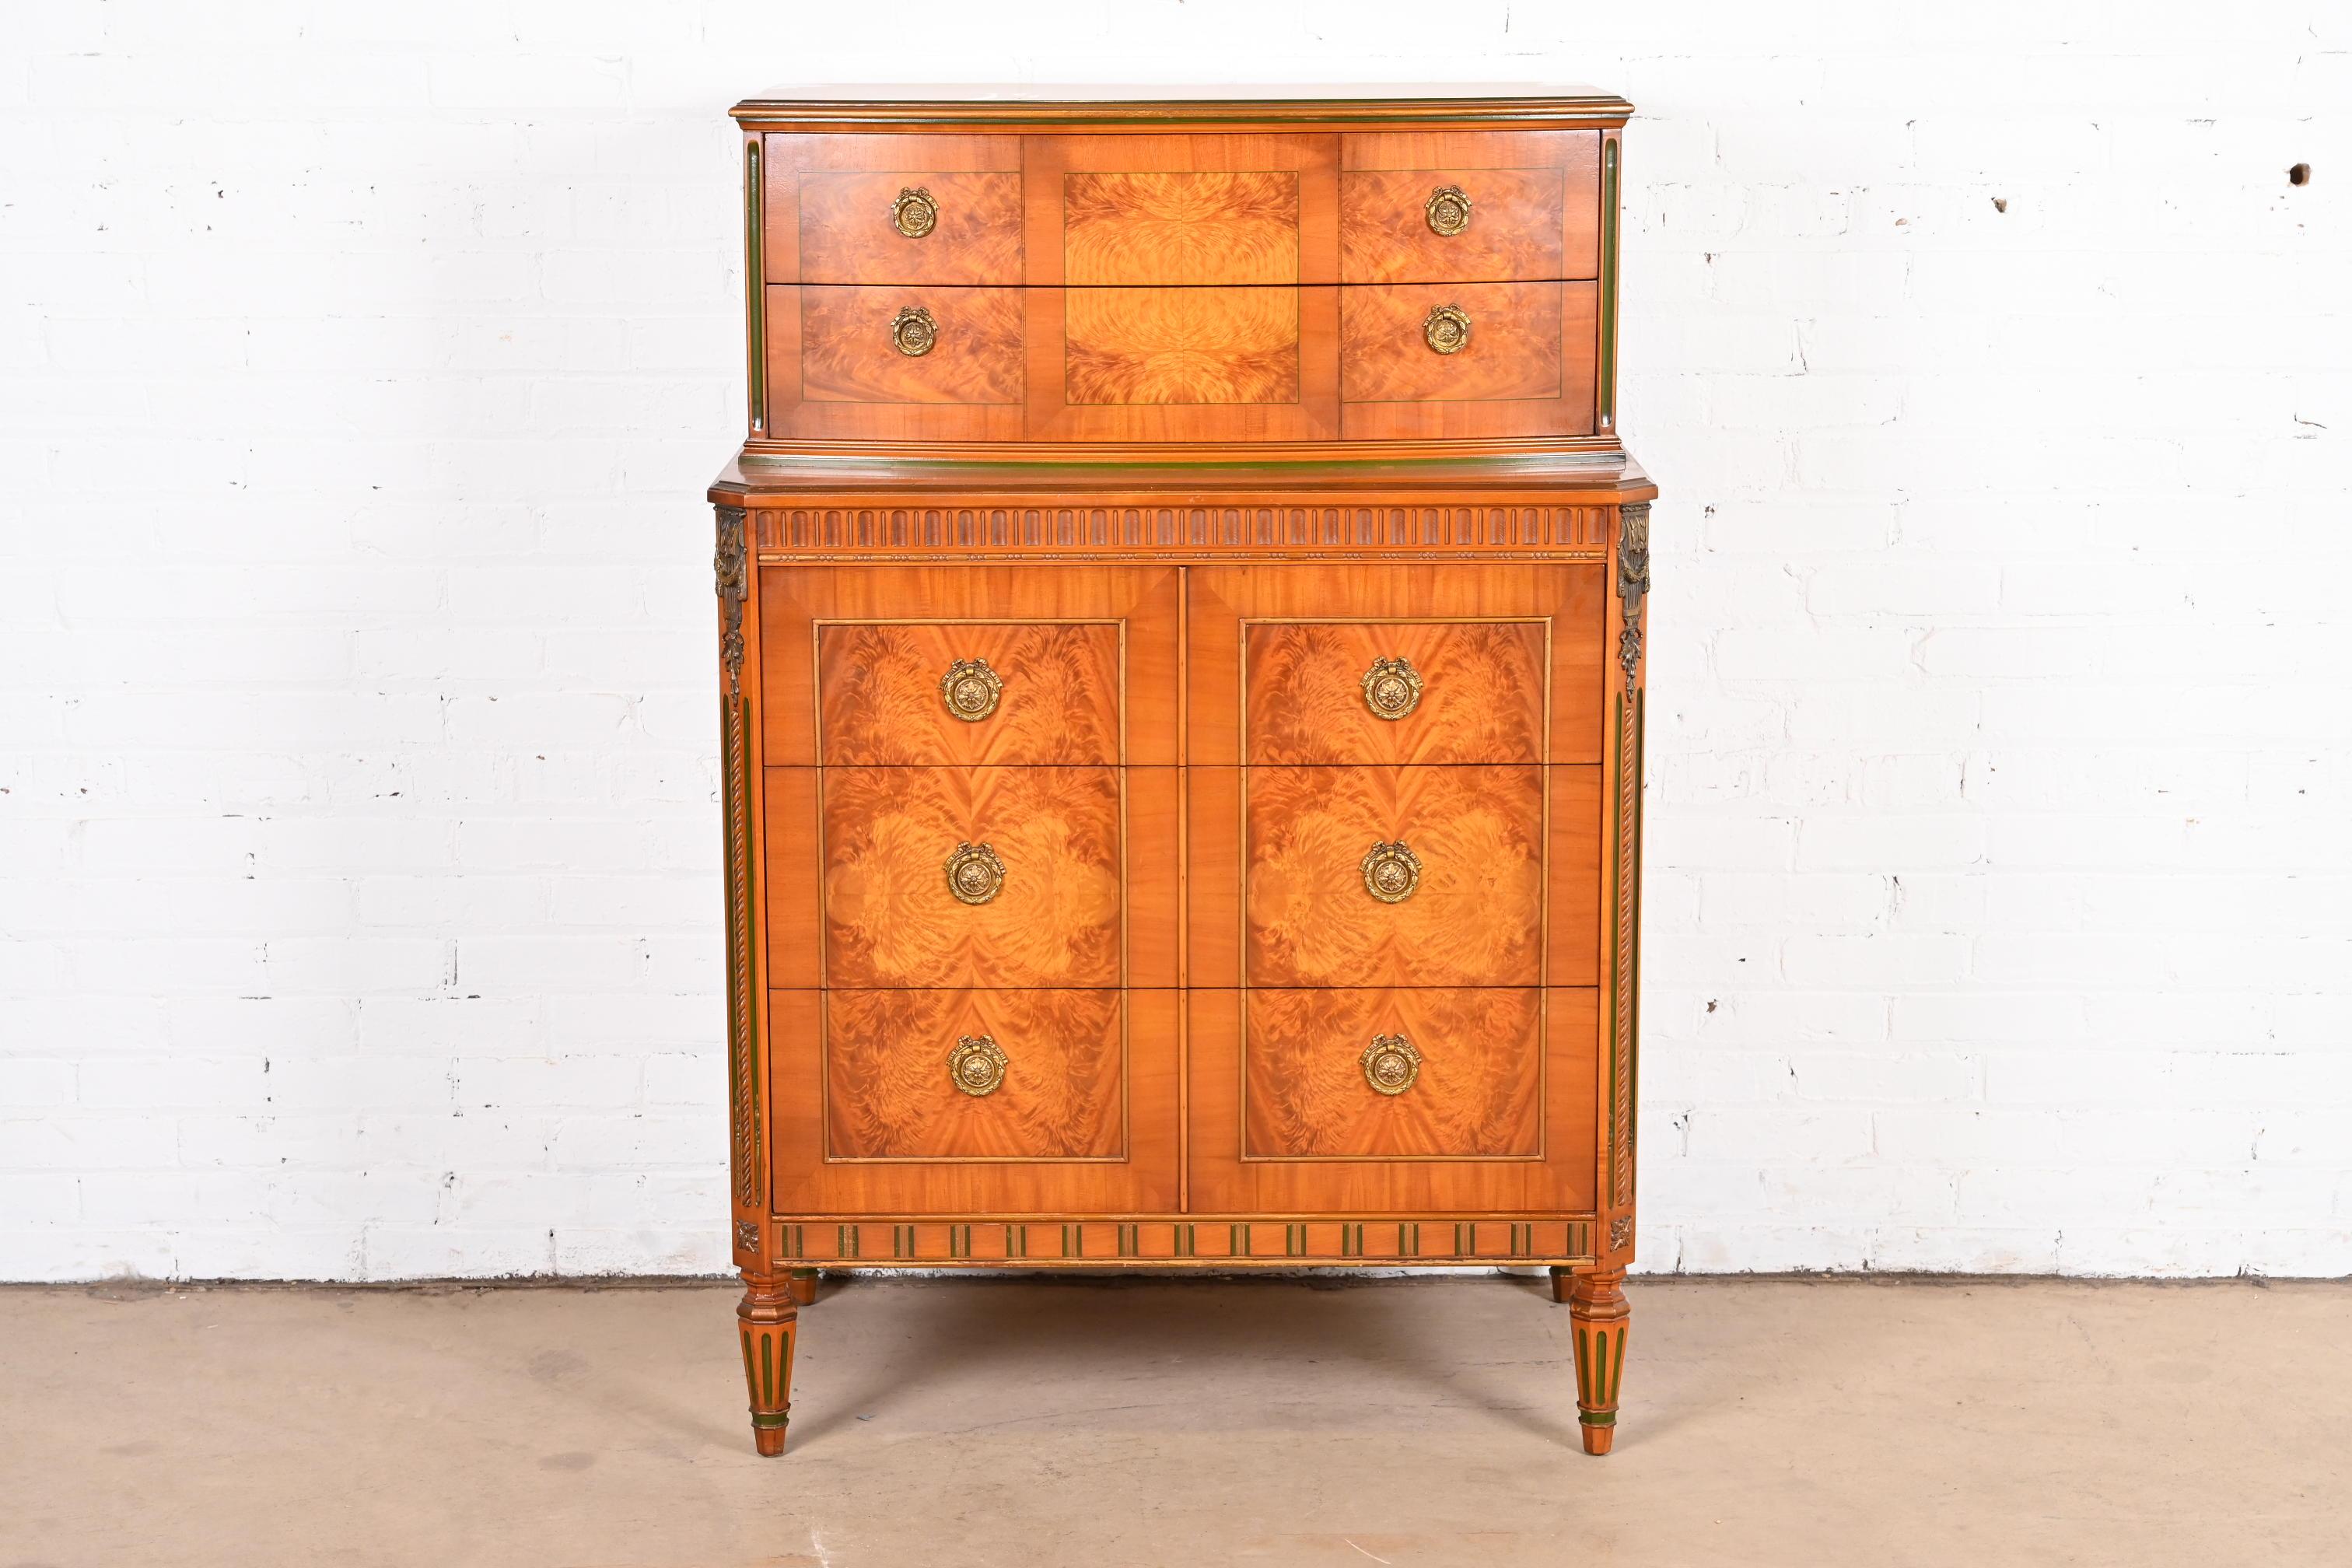 A gorgeous vintage French Regency Louis XVI style highboy dresser or chest of drawers

Attributed to Romweber

USA, Circa 1930s

Satinwood, with beautiful book-matched burl wood top and front, gold gilt and green painted details, and original